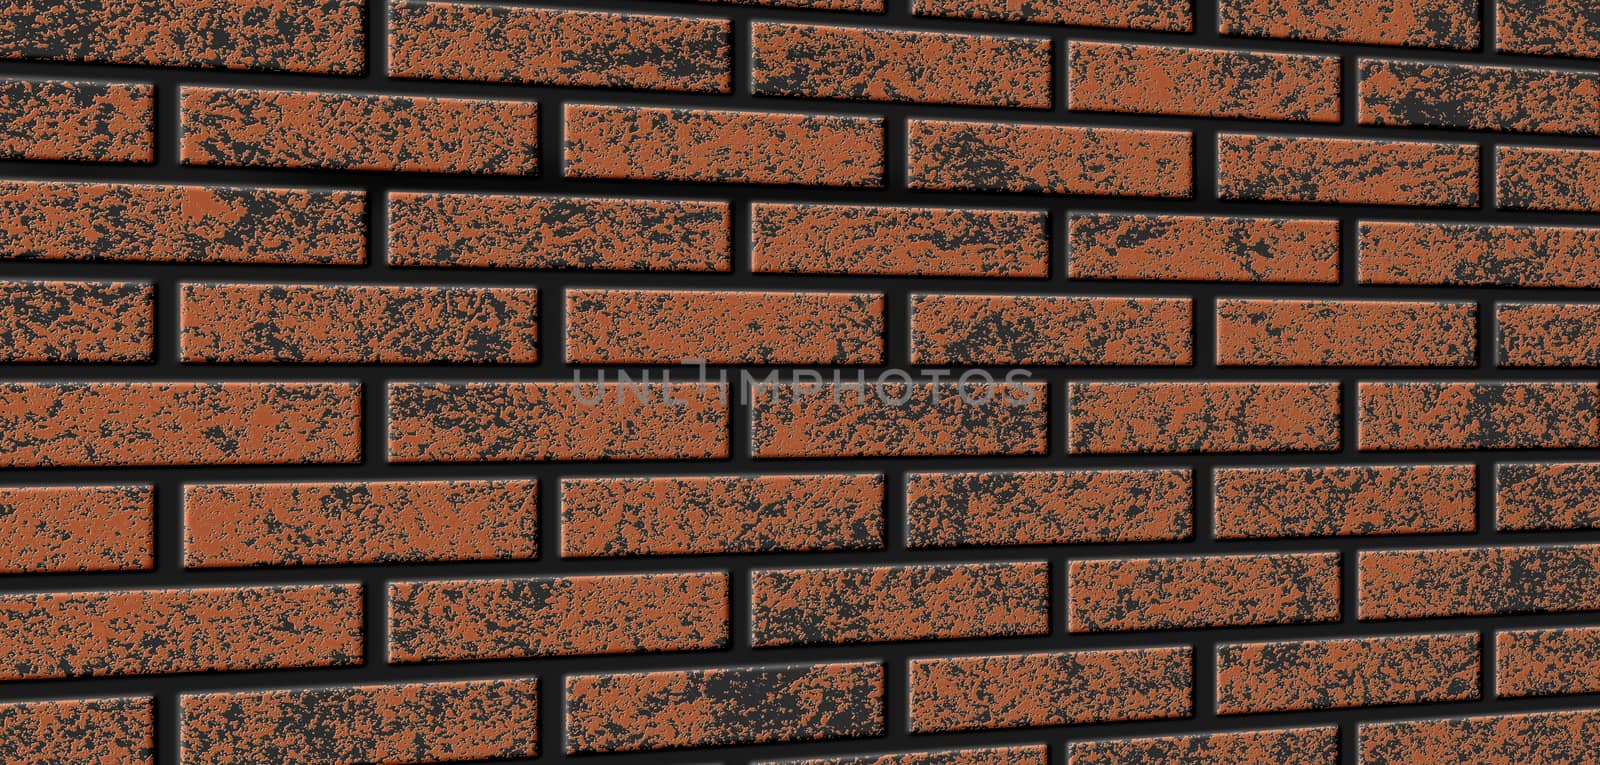 Brick wall perspective illustration. Red textured background. Pattern of decorative wall surface